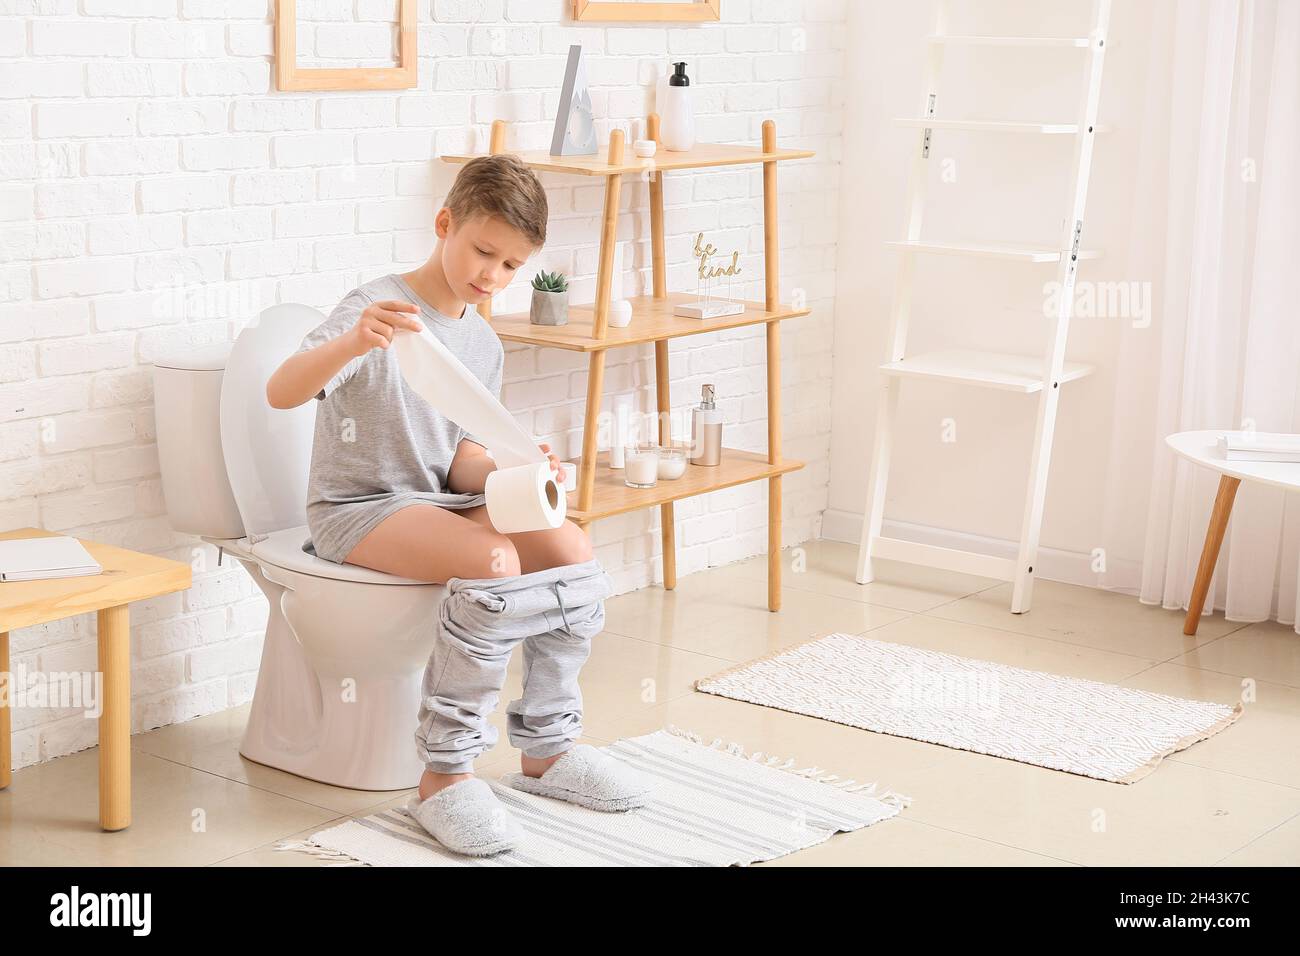 Little boy with paper sitting on toilet bowl in bathroom Stock Photo